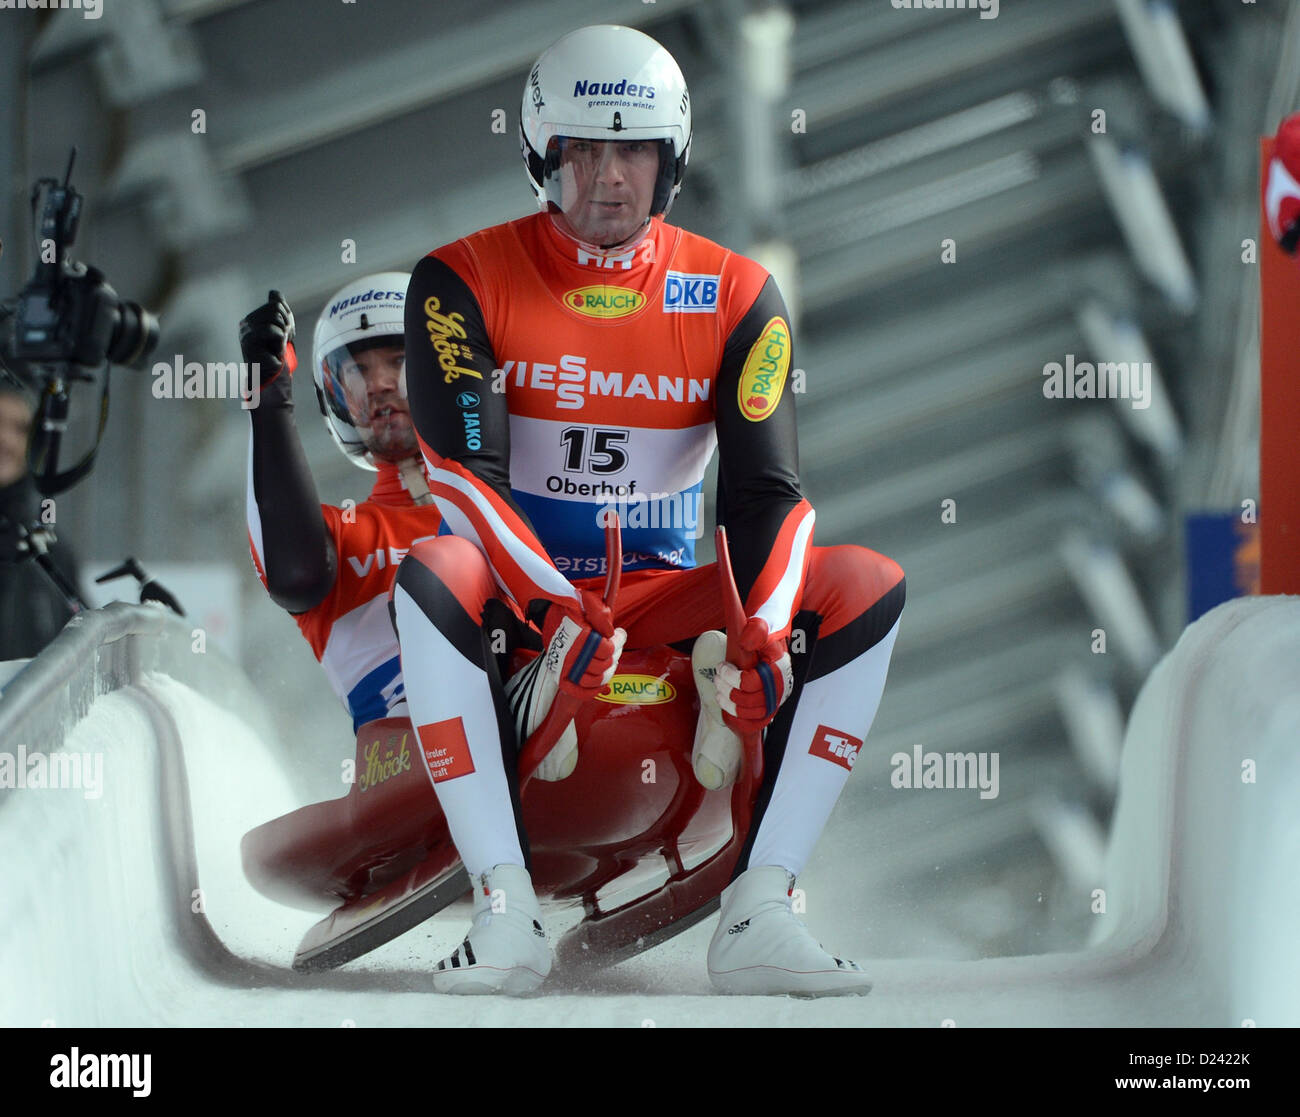 Austrian lugers Peter Penz (FRONT) and Georg Fischler celebrate after their run in the FIL European Luge Championships in Oberhof, Germany, 12 January 2013. They finished in third place. Photo: Hendrik Schmidt Stock Photo